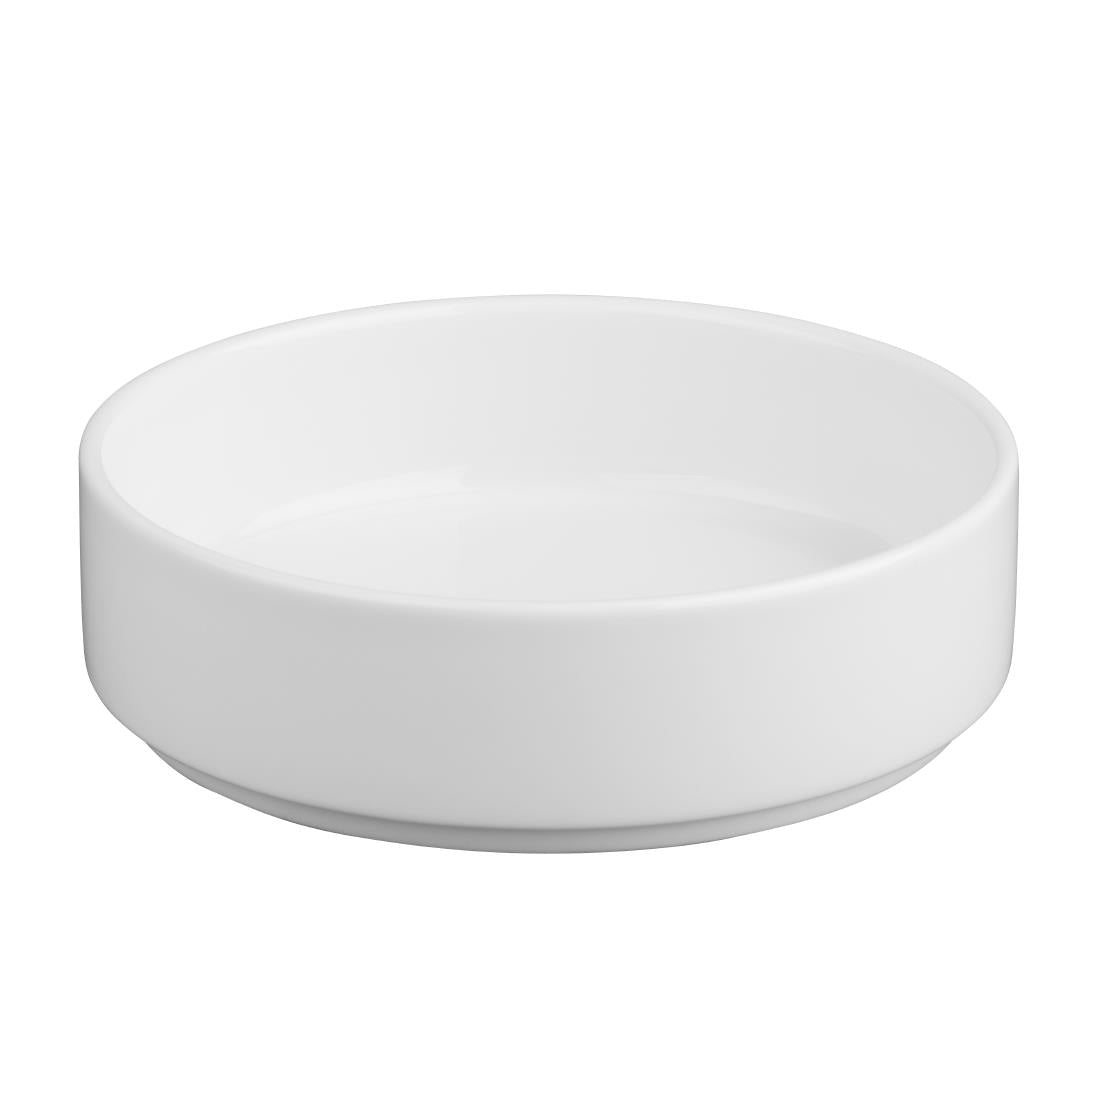 CK070 Olympia Whiteware Flat Walled Bowl - 152mm 6" (Box of 6)